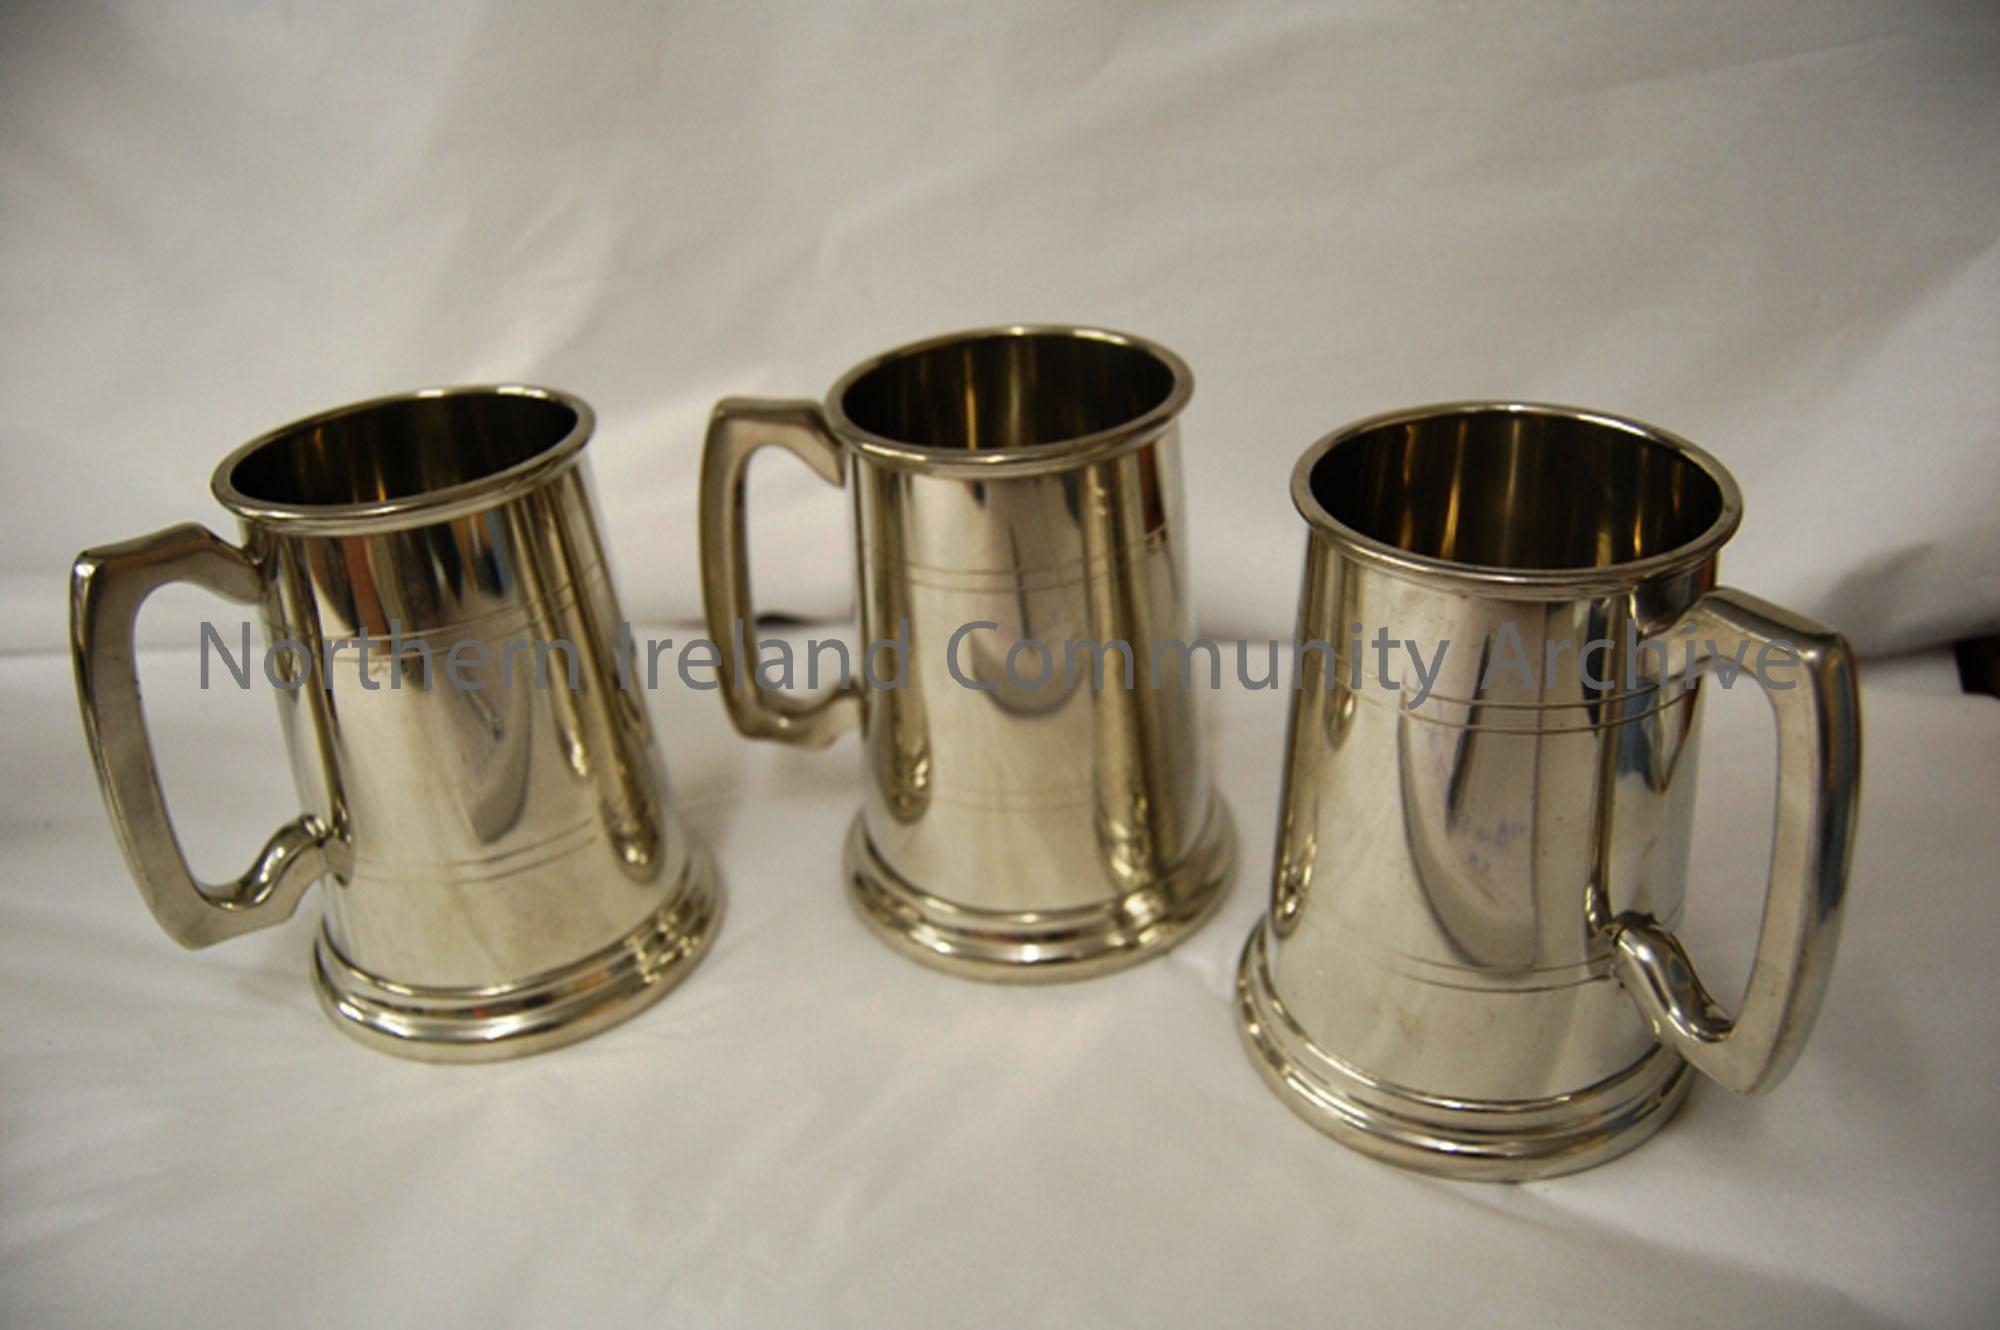 4 blank pewter tankards, made in Sheffield England. English Pewter.